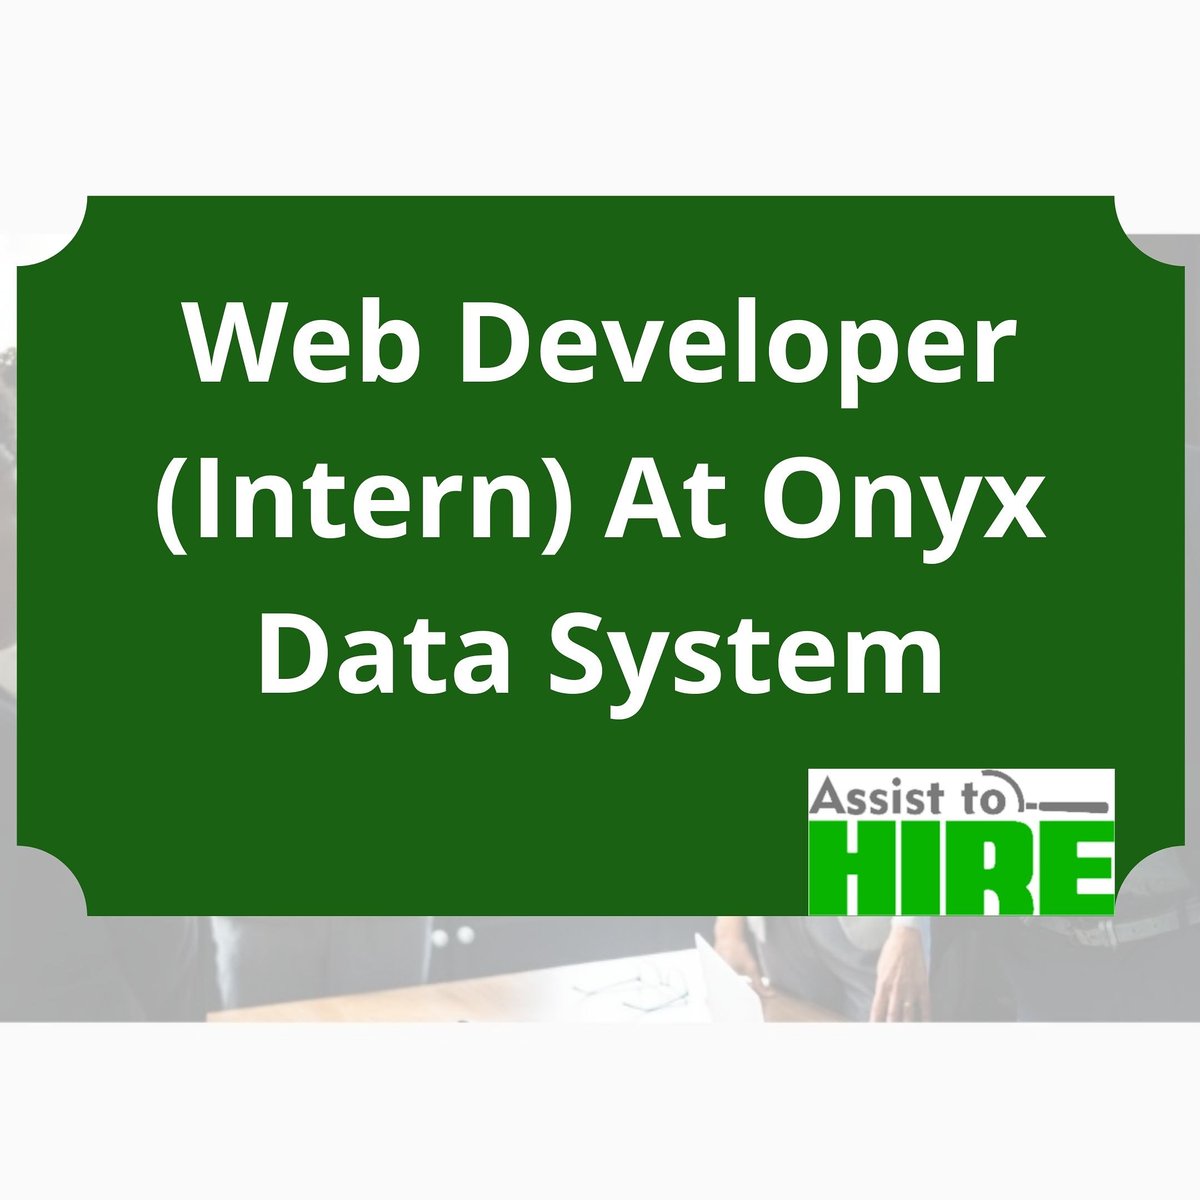 Web Developer (Intern) At Onyx Data System

Applicants should be proficient in HTML, CSS, have a good understanding of PHP, javascript(reactjs).

Applicants MUST reside around Iyana-Ipaja-Egbeda axis.

Apply here: bit.ly/34LRr22

#web
#webdeveloper
#intern #internjobs